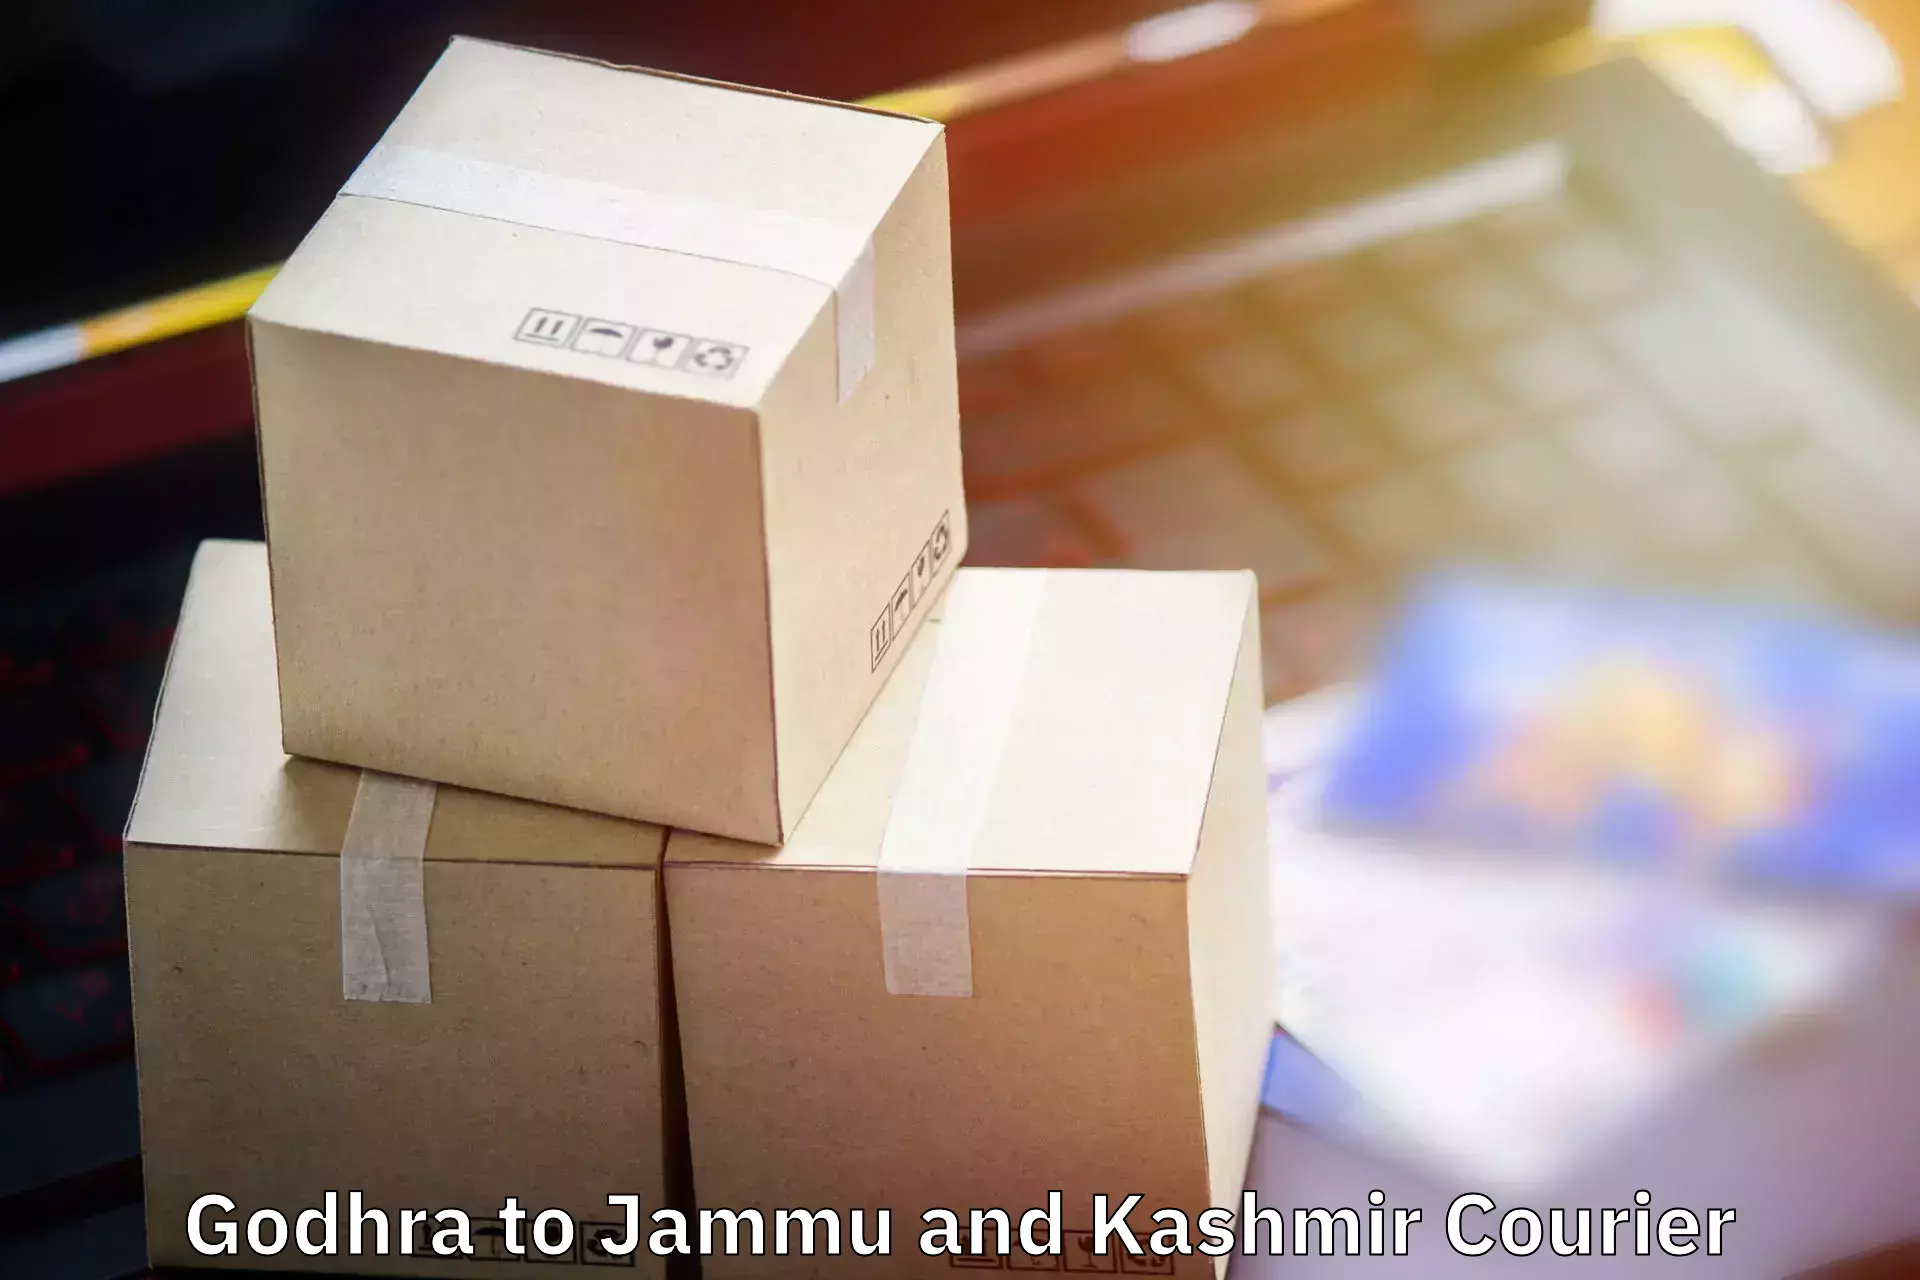 Personal effects shipping in Godhra to Budgam